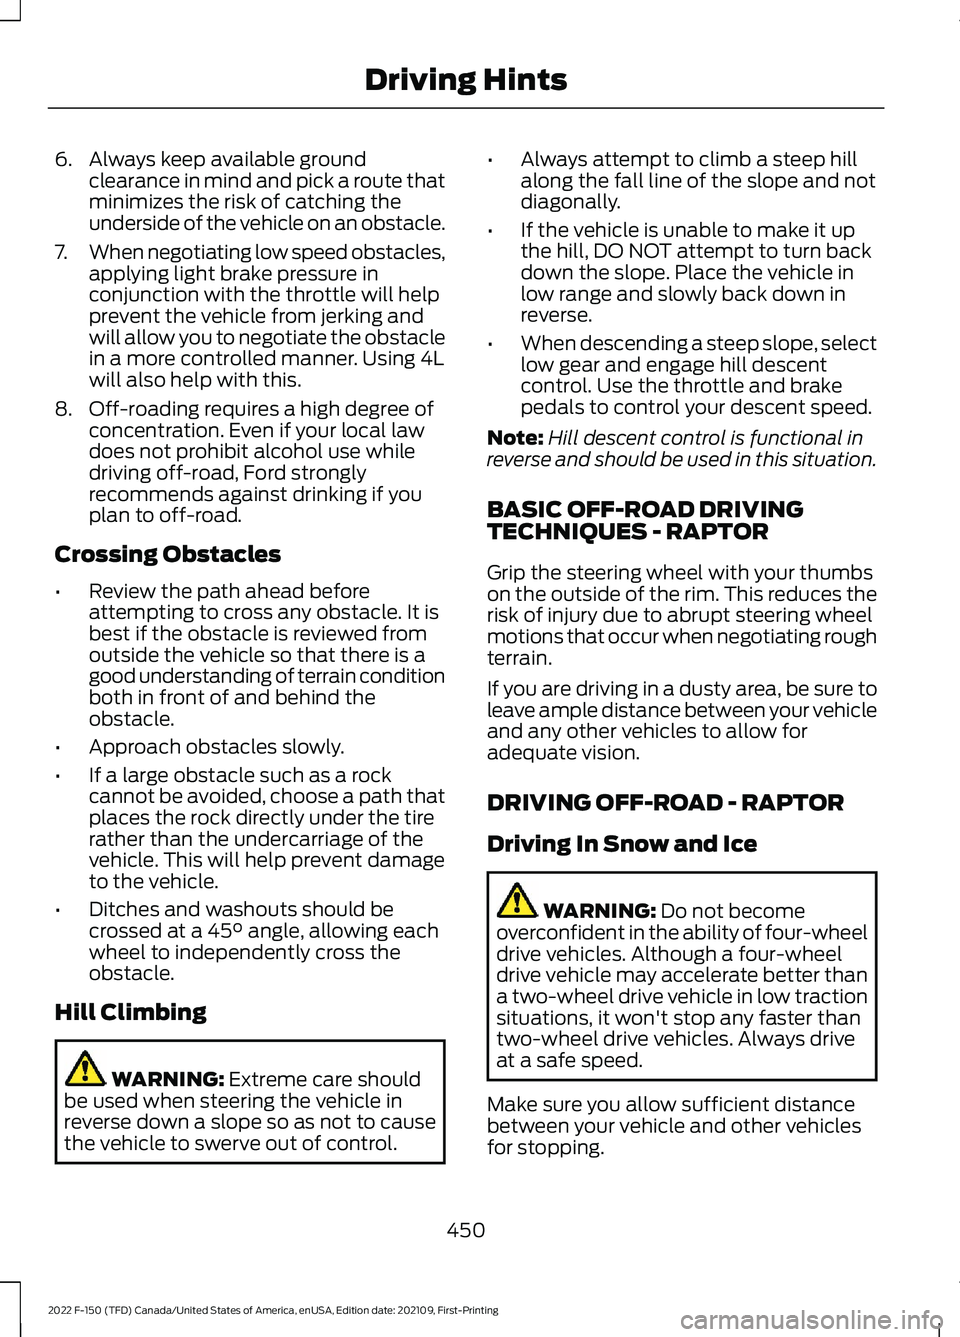 FORD F-150 2022 Service Manual 6. Always keep available ground
clearance in mind and pick a route that
minimizes the risk of catching the
underside of the vehicle on an obstacle.
7. When negotiating low speed obstacles,
applying li